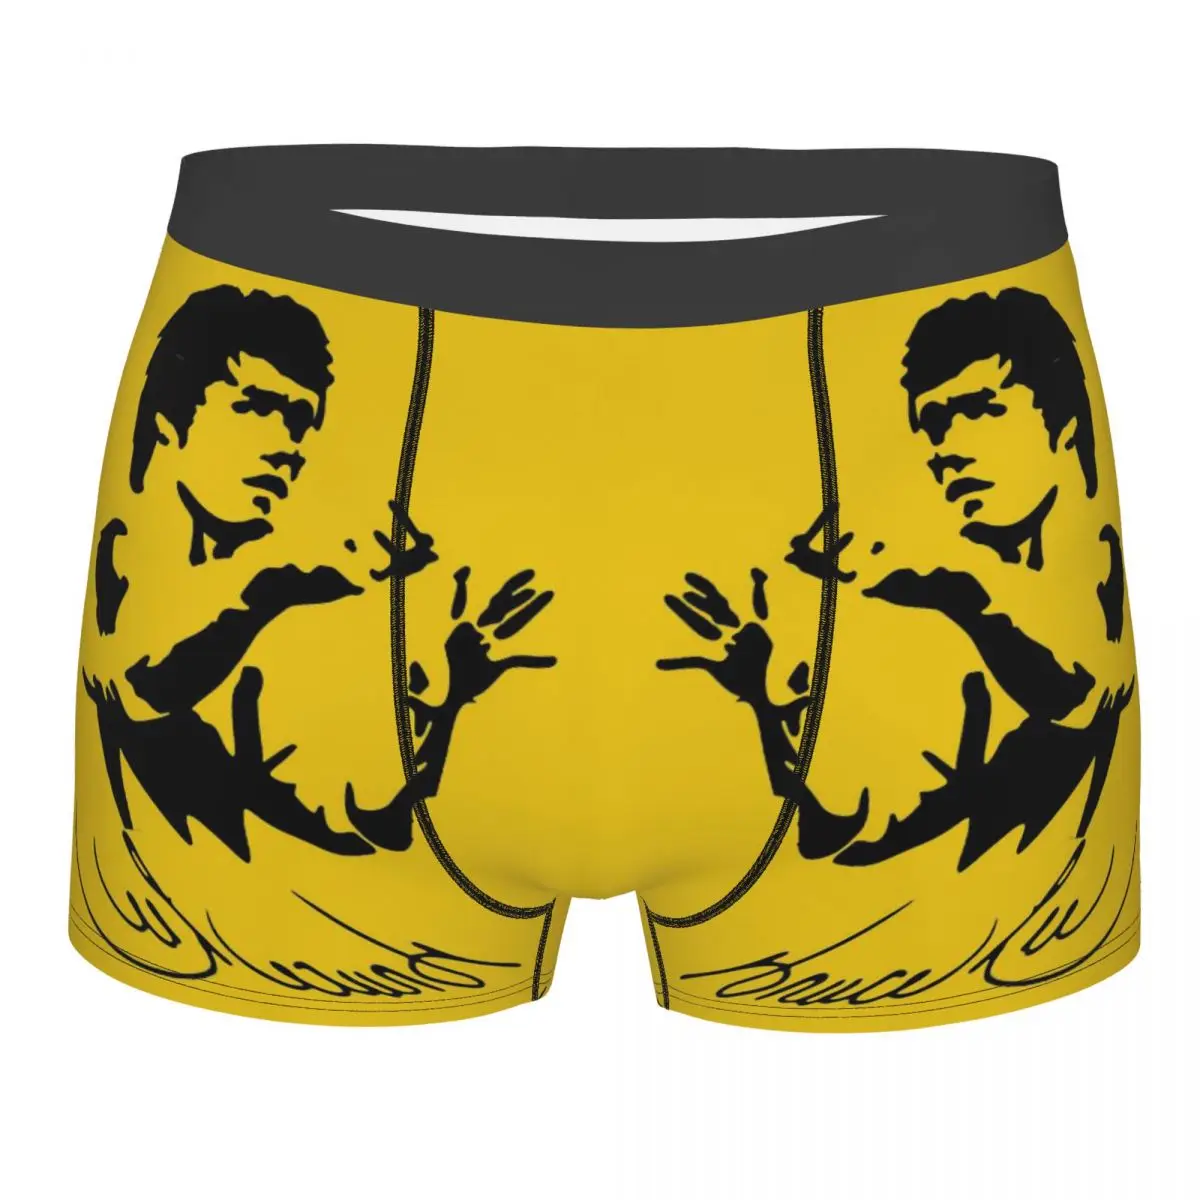 Bruce Lee Kung Fu Men's Boxer Briefs special Highly Breathable Underwear High Quality 3D Print Shorts Birthday Gifts